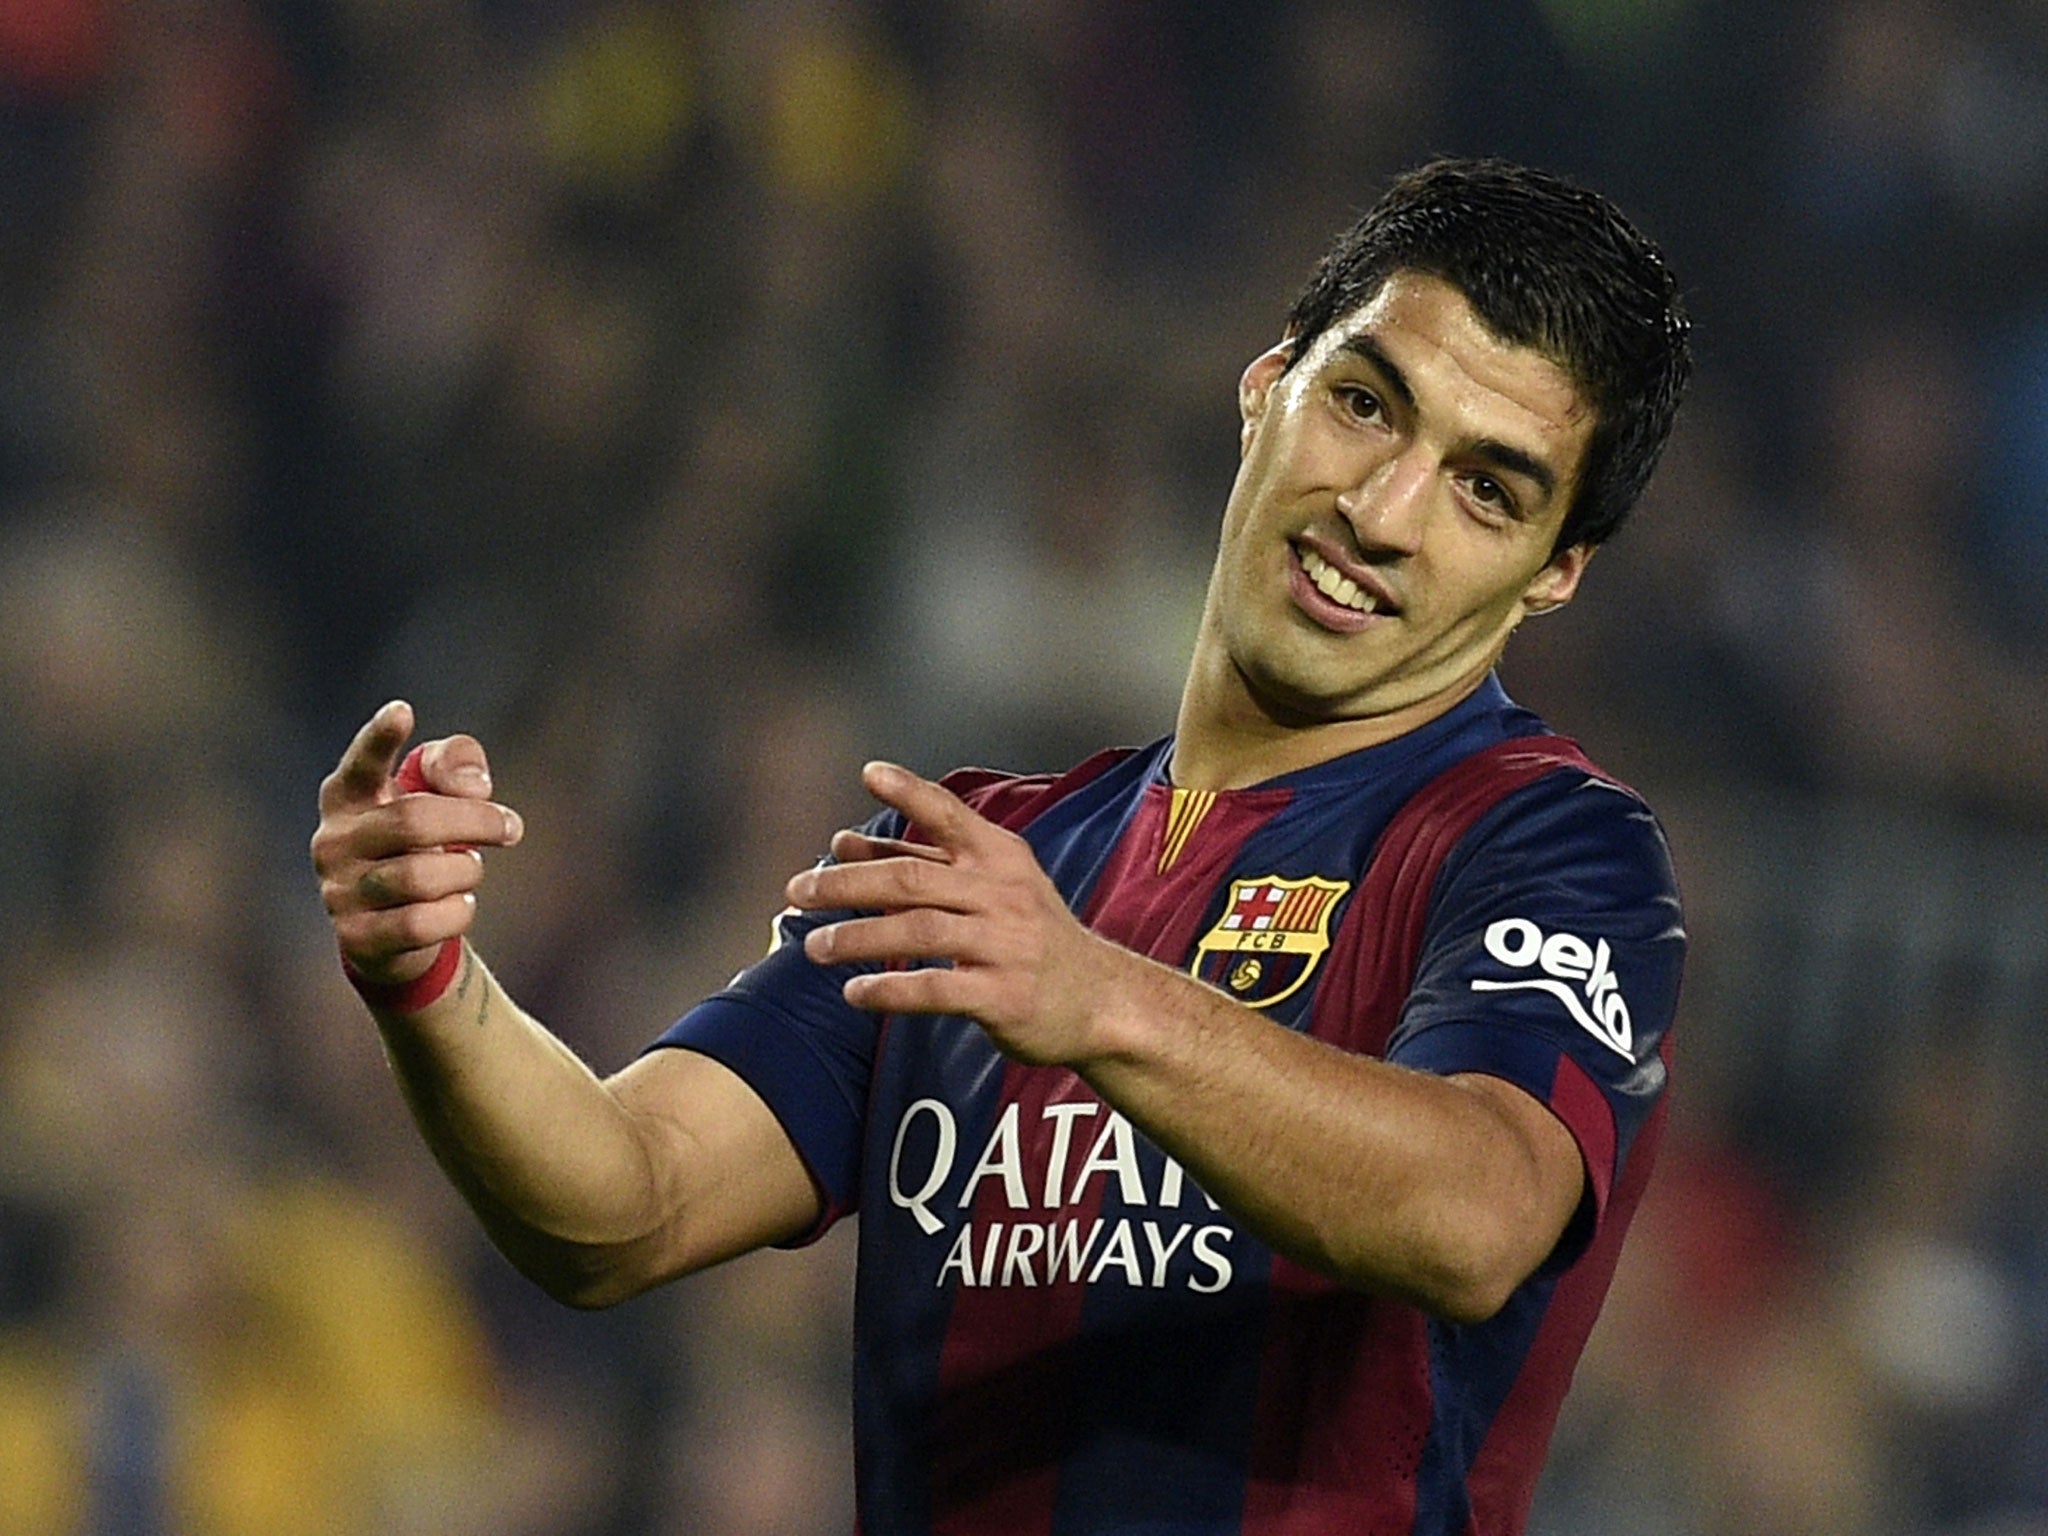 Player of Luis Suarez's stature leave clubs like Liverpool